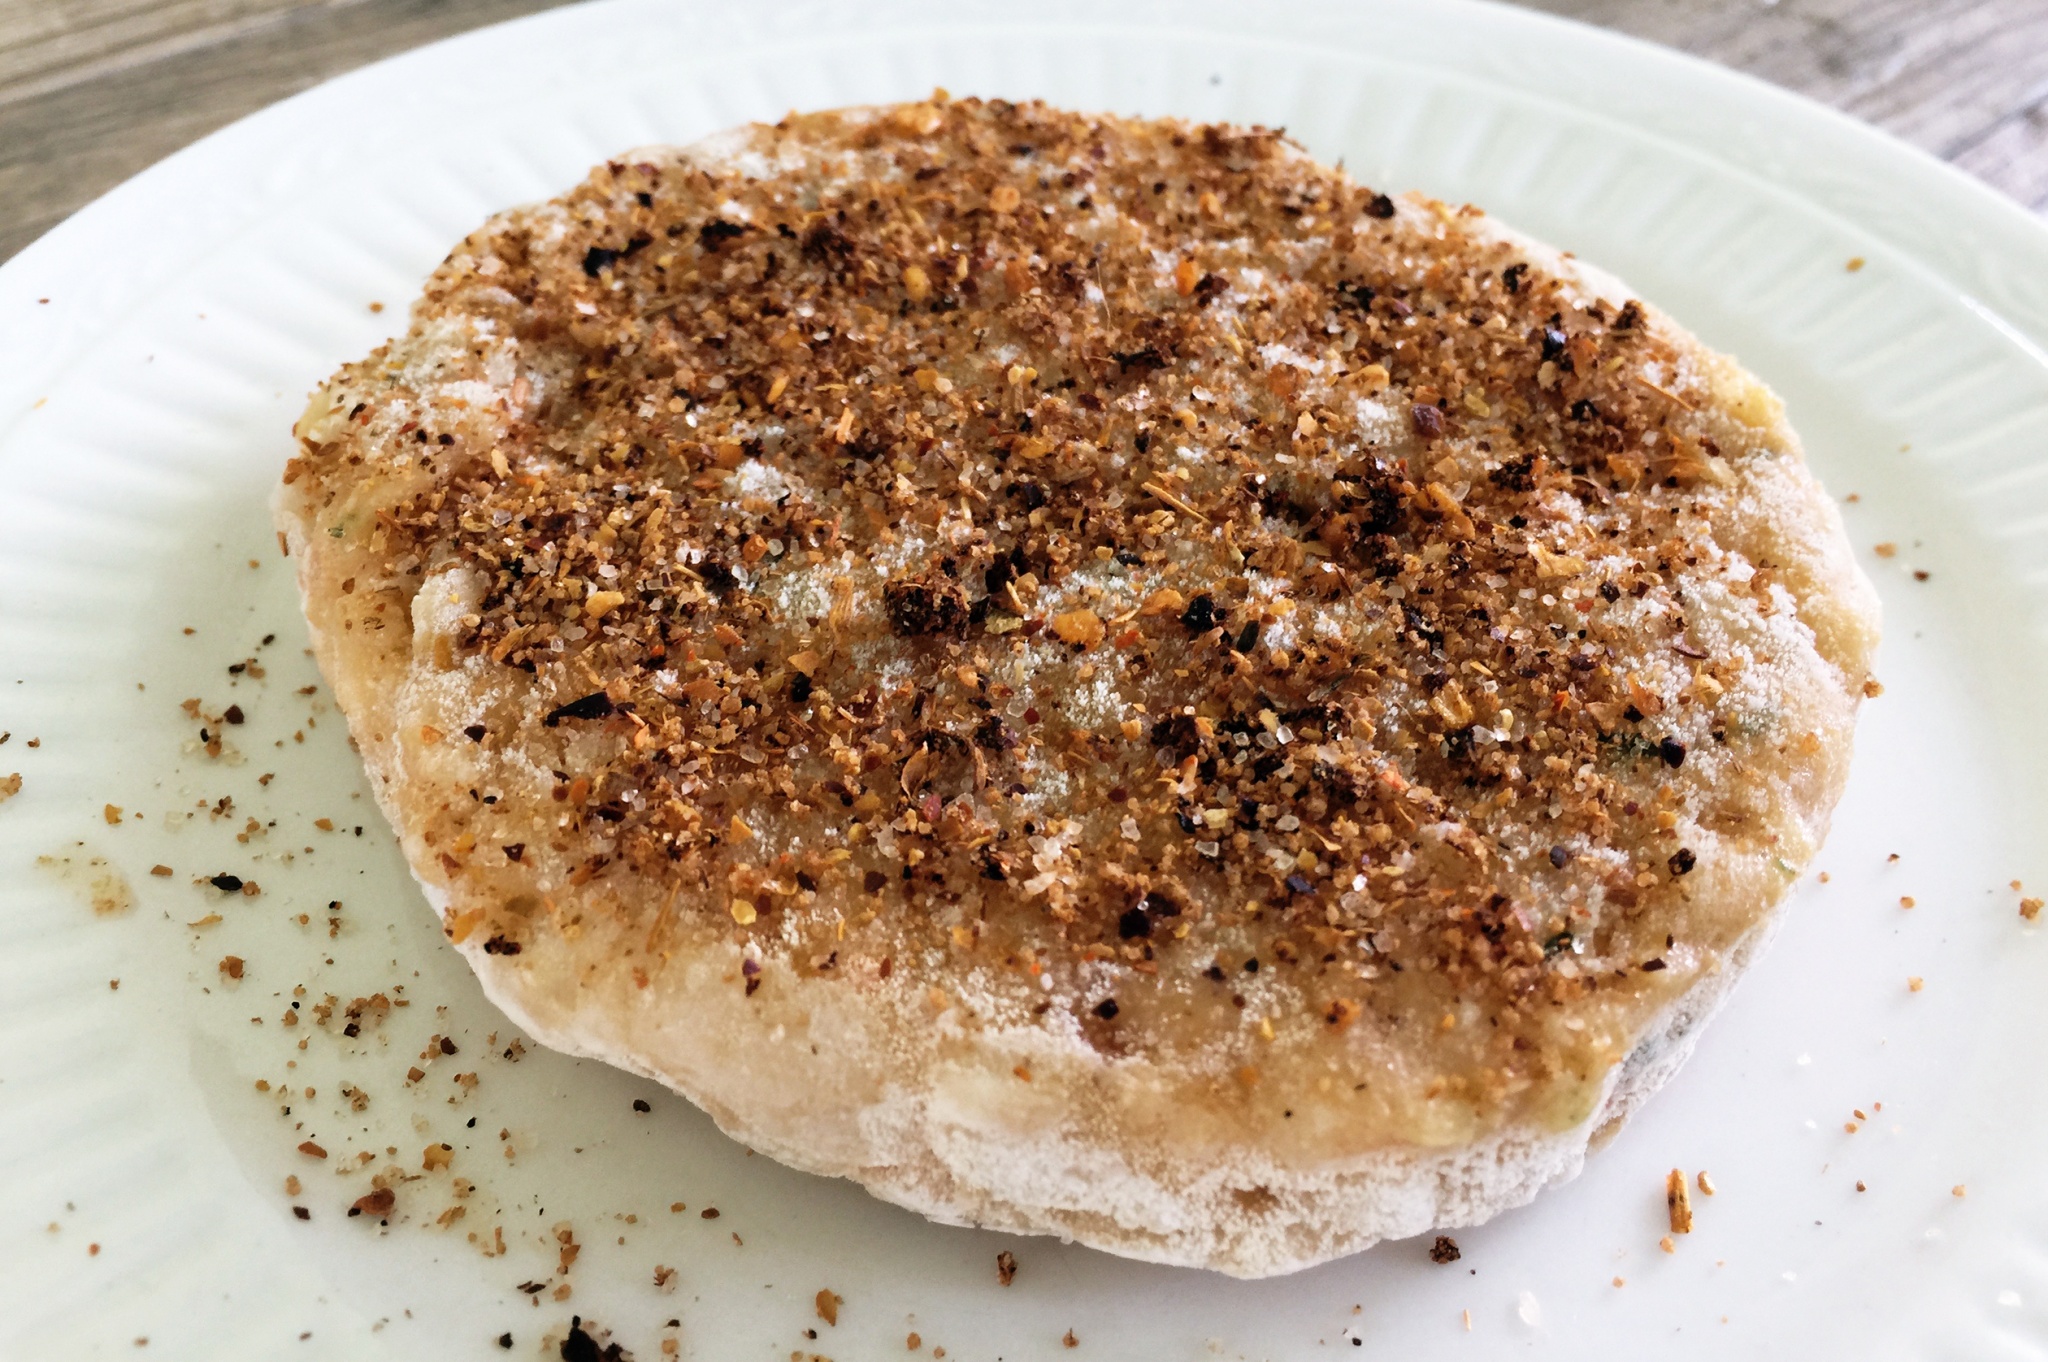 Wild Alaskan Pollock Burger crusted with chili and spices